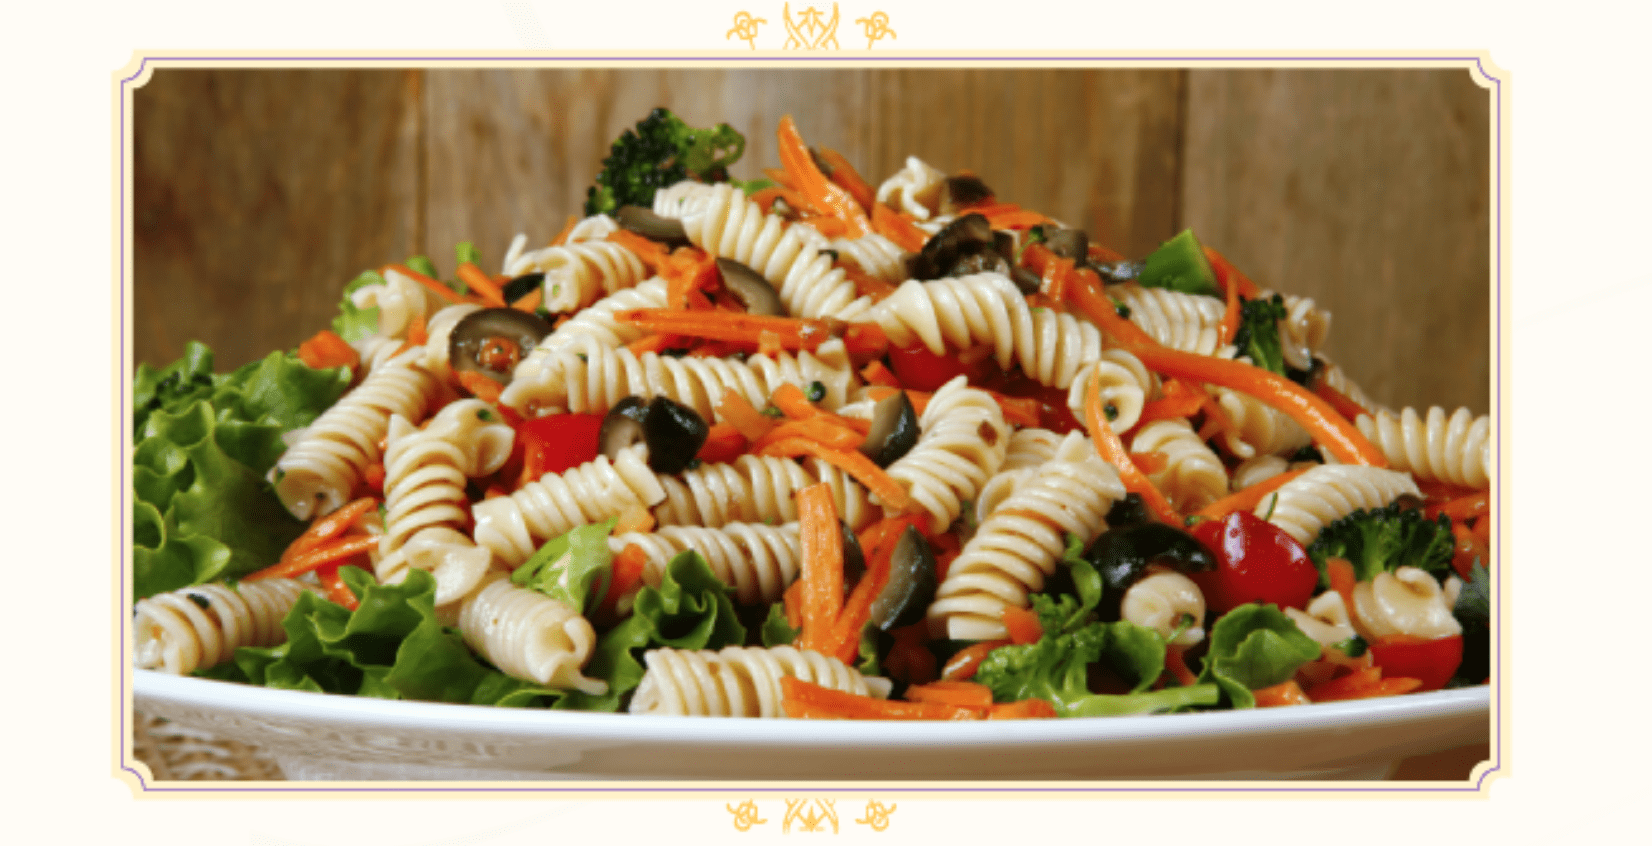 Meatless Monday: Pasta Salad With Chickpeas Recipe